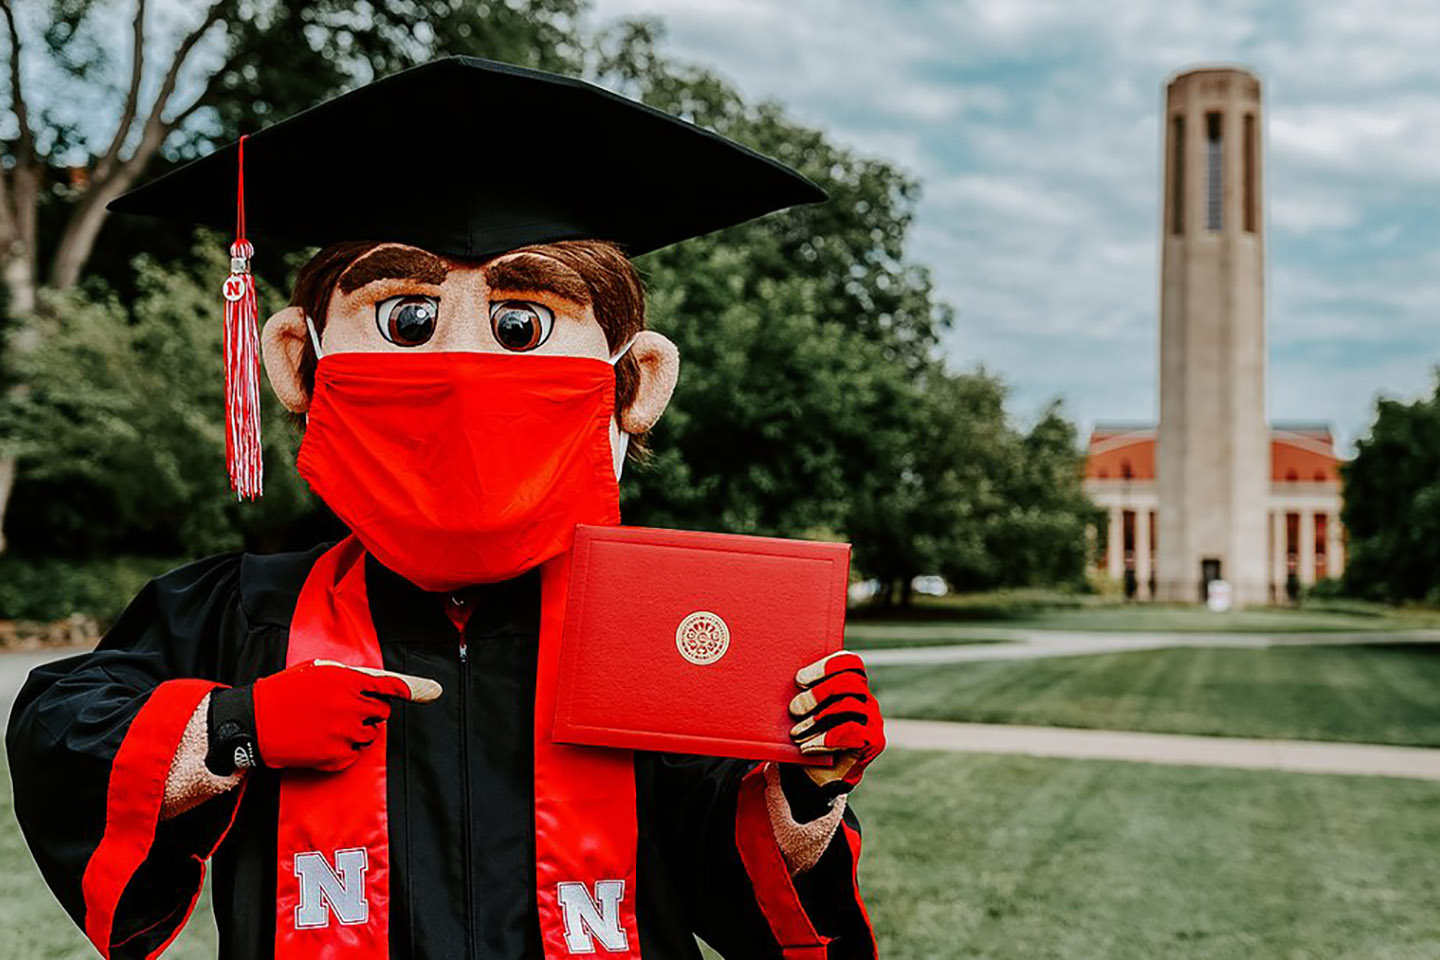 Mascot Herbie Husker with his diploma.